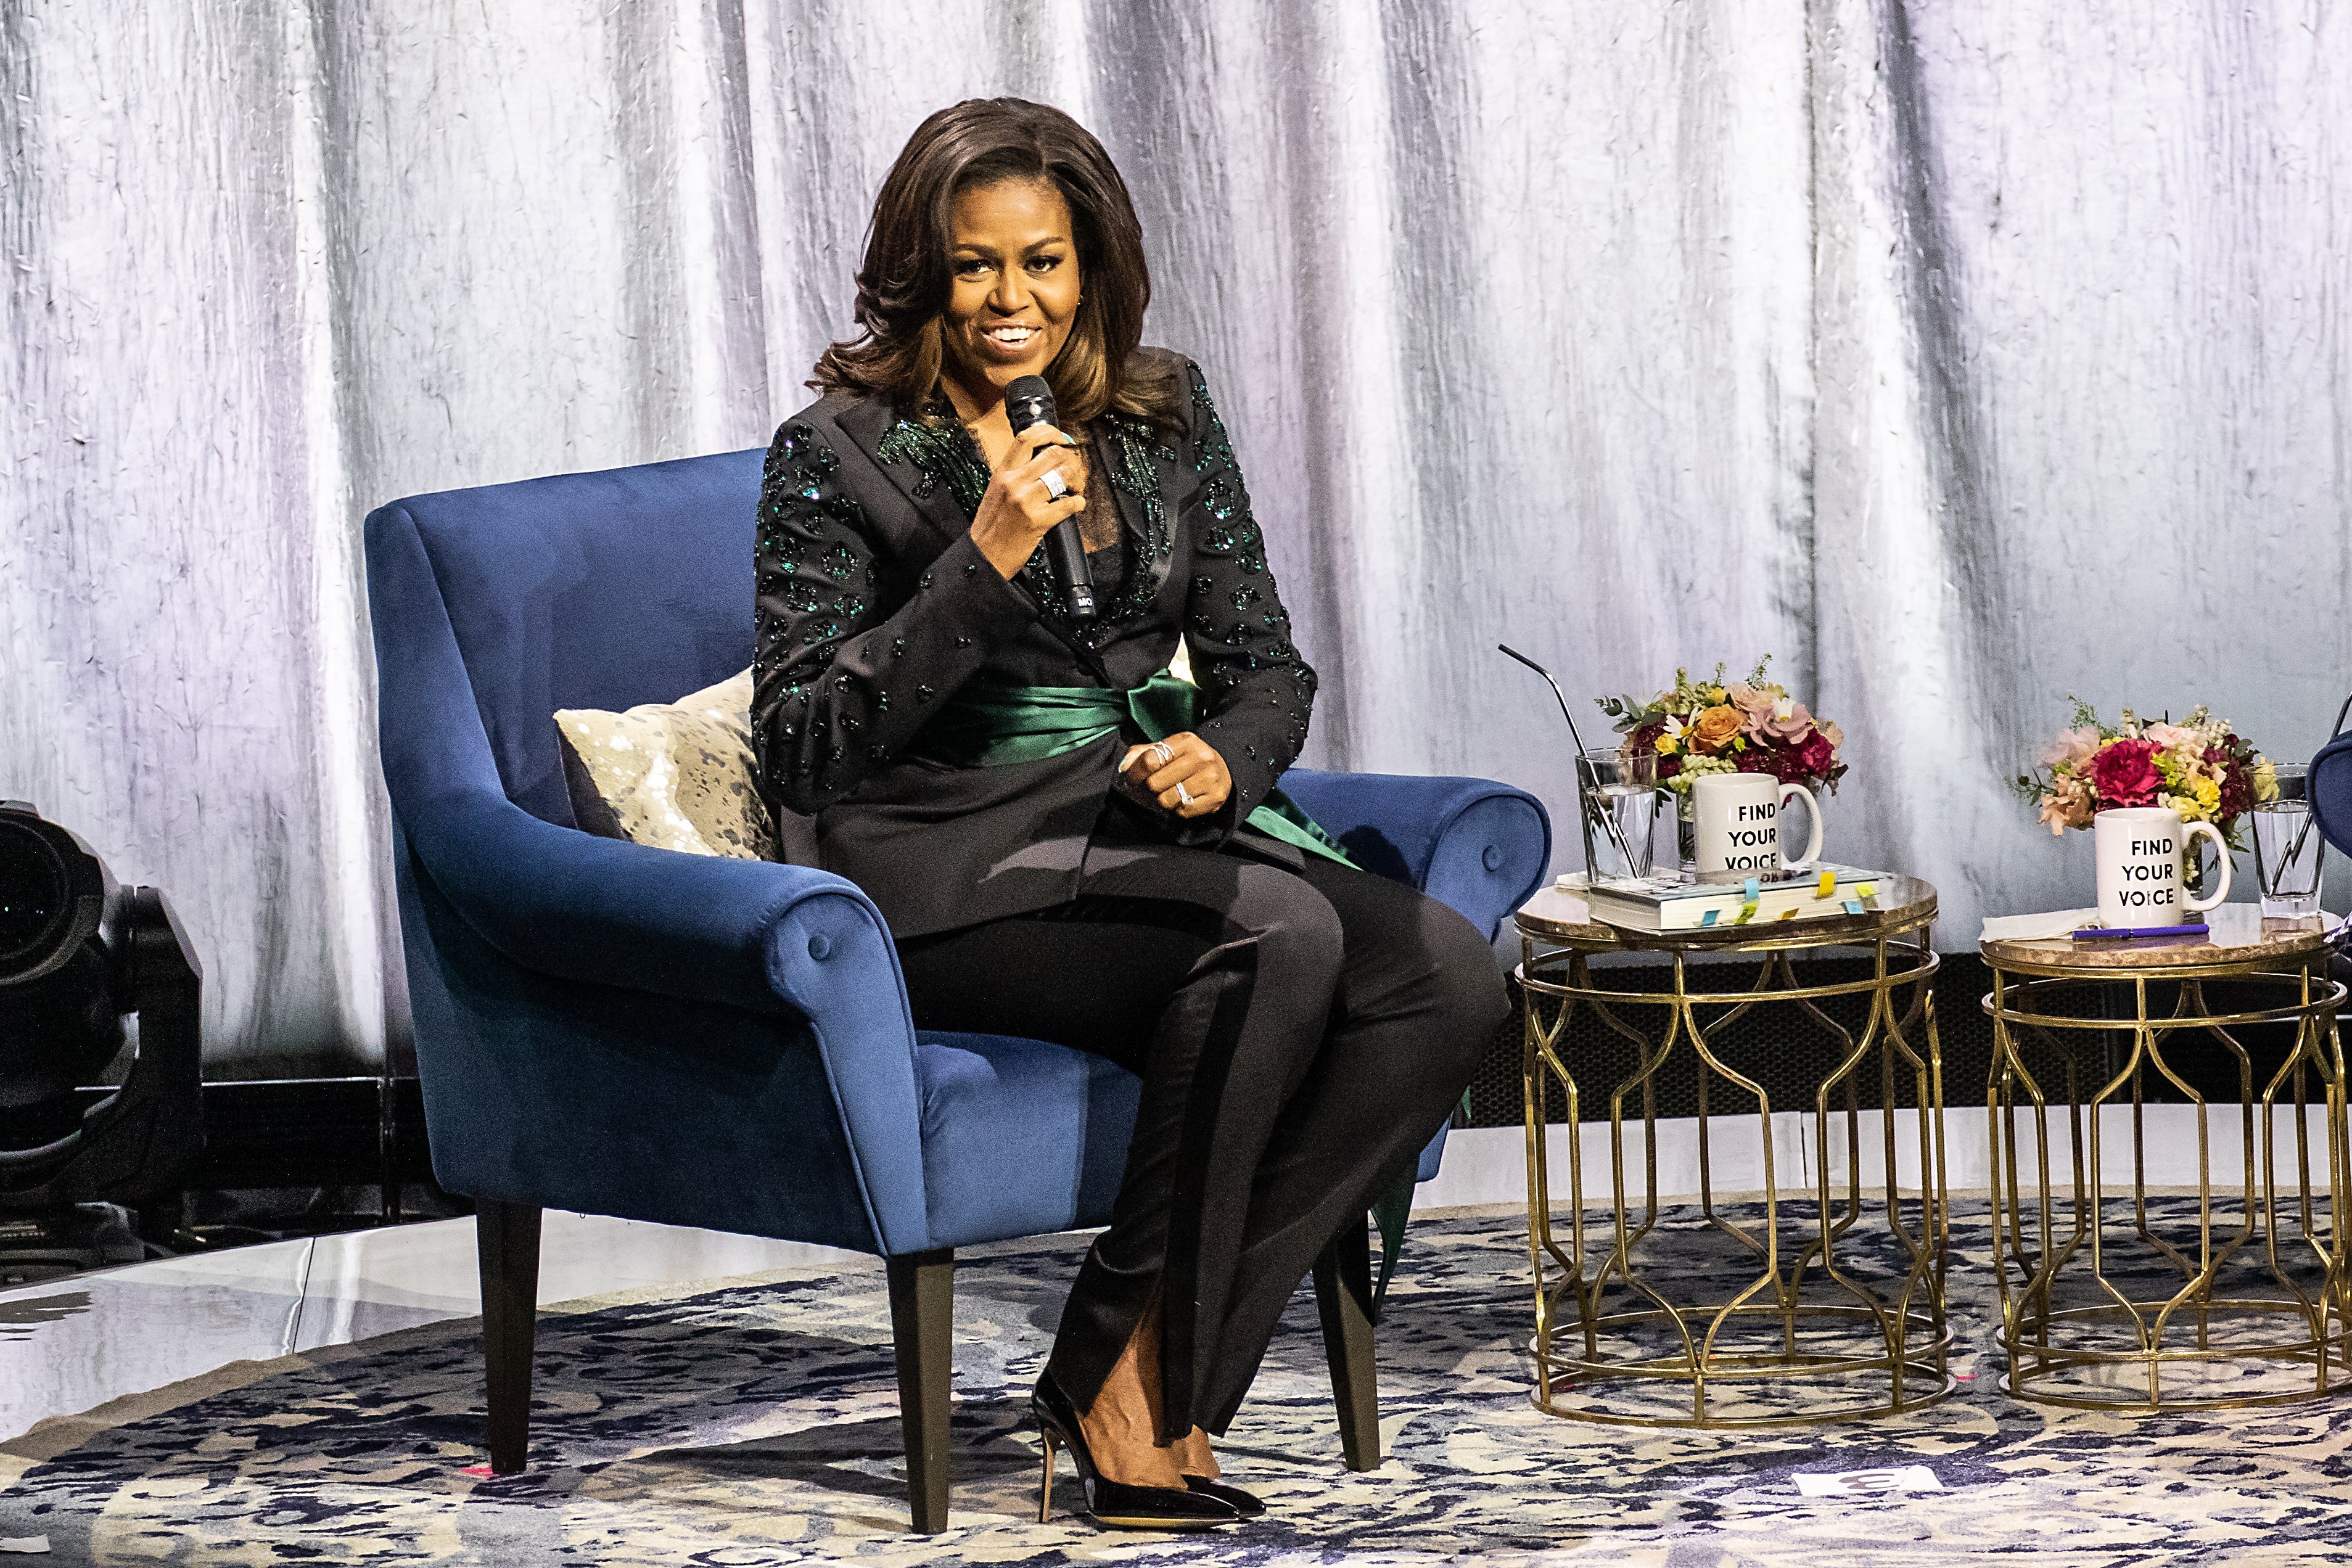 Michelle Obama having a conversation about her book "Becoming" in Oslo, Norway on April 11, 2019. |Photo: Getty Images